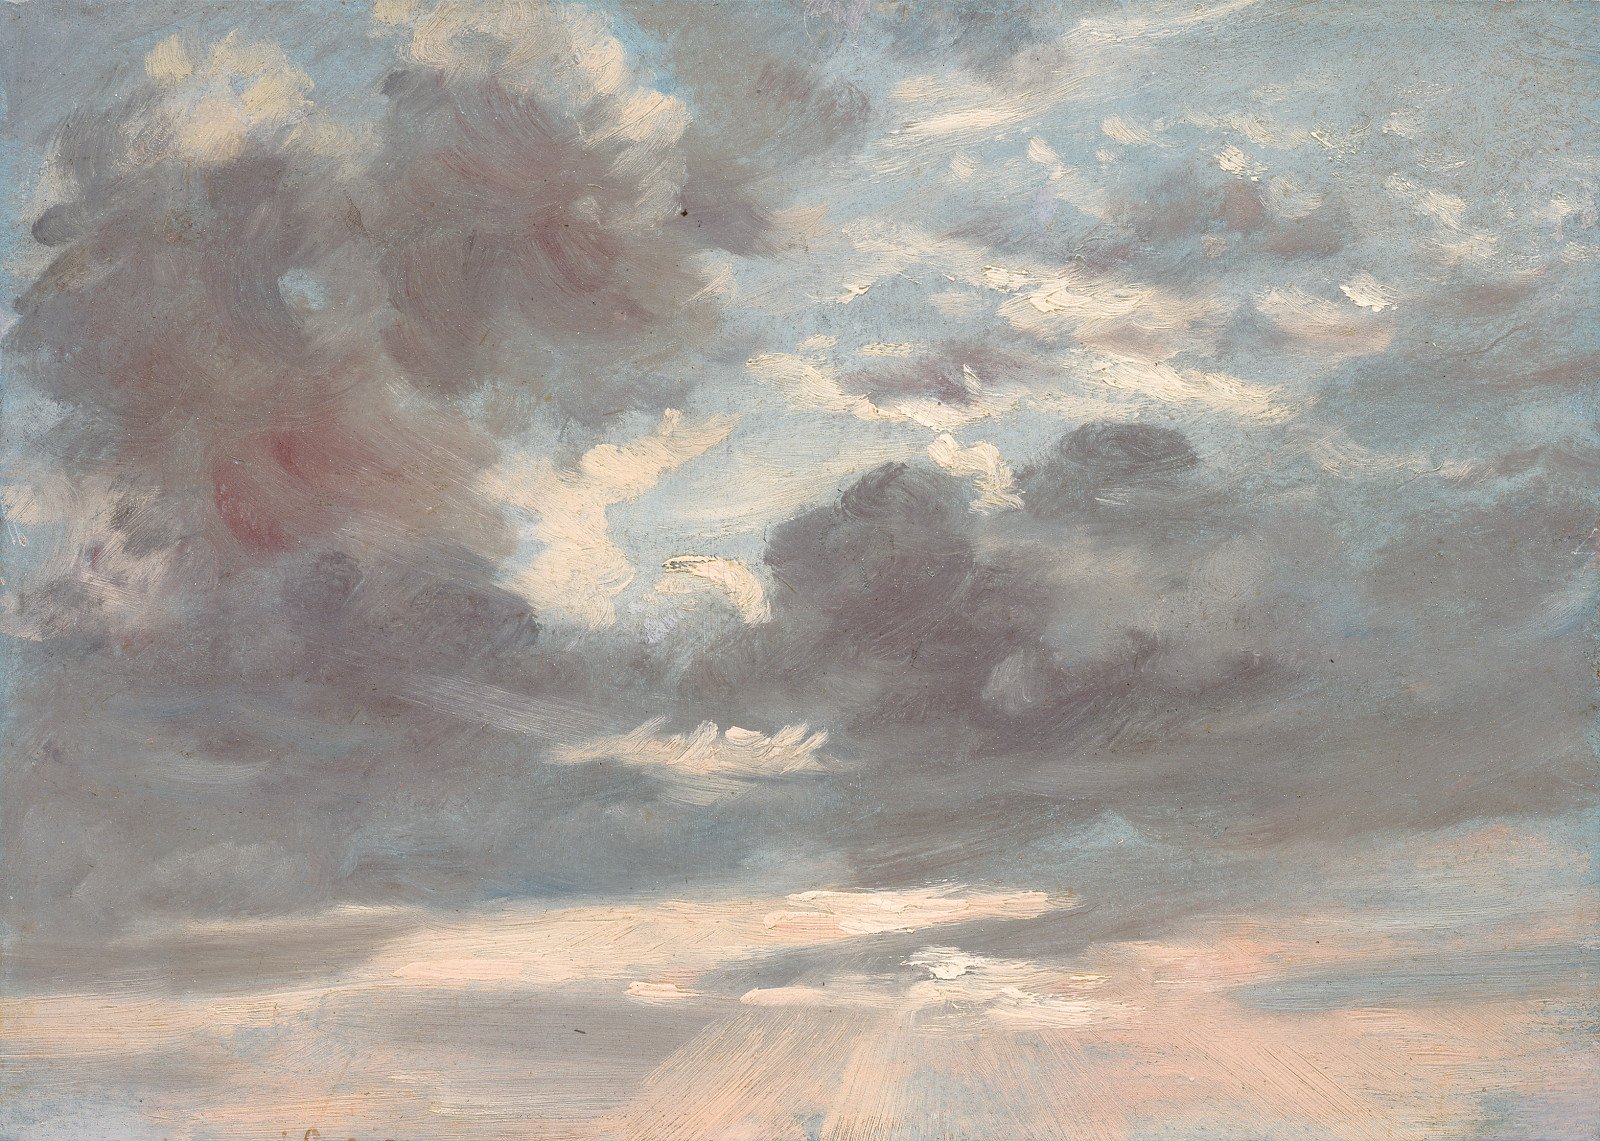 Landscape with clouds over the plain. Sketch, 1822, 57×47 cm by John  Constable: History, Analysis & Facts | Arthive